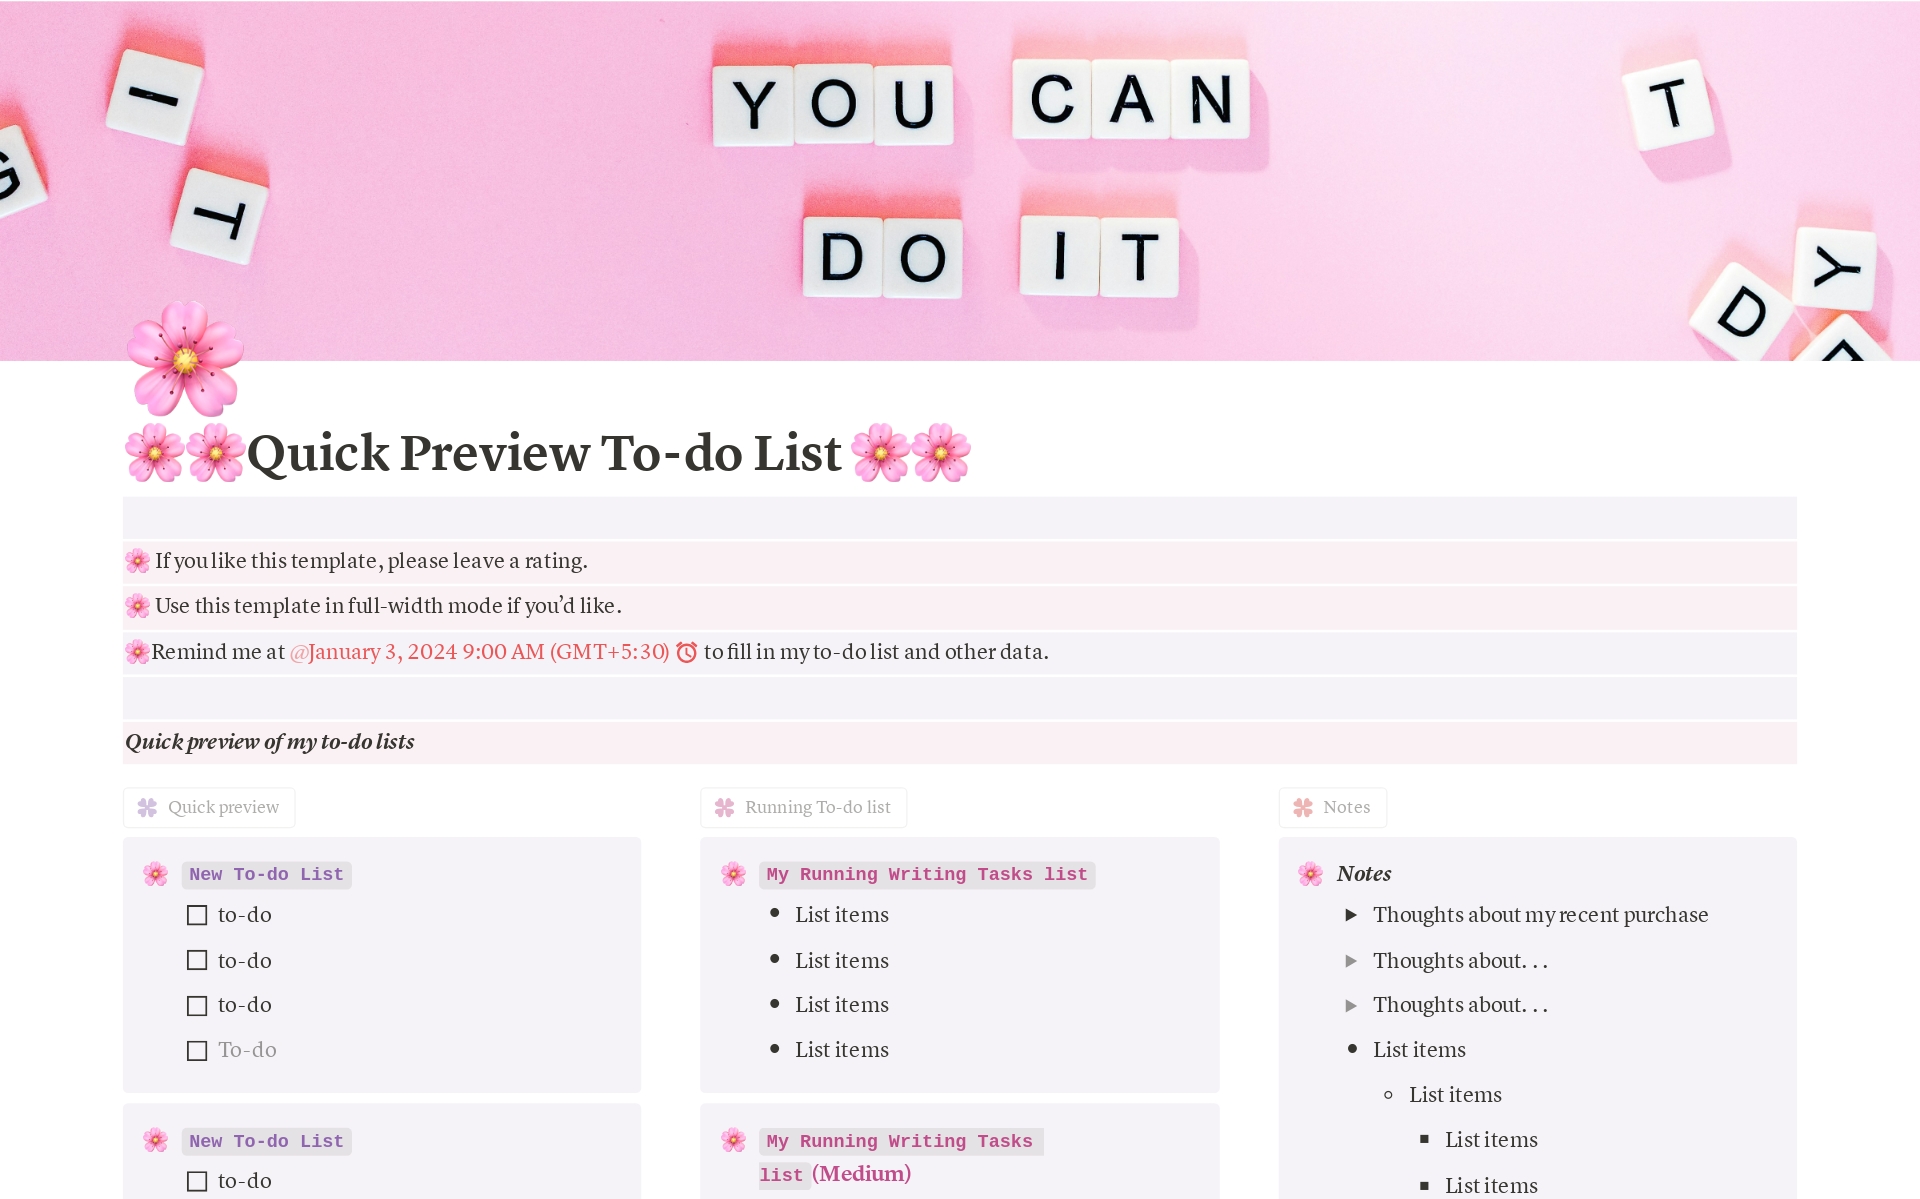 A template preview for Quick Preview To-do List